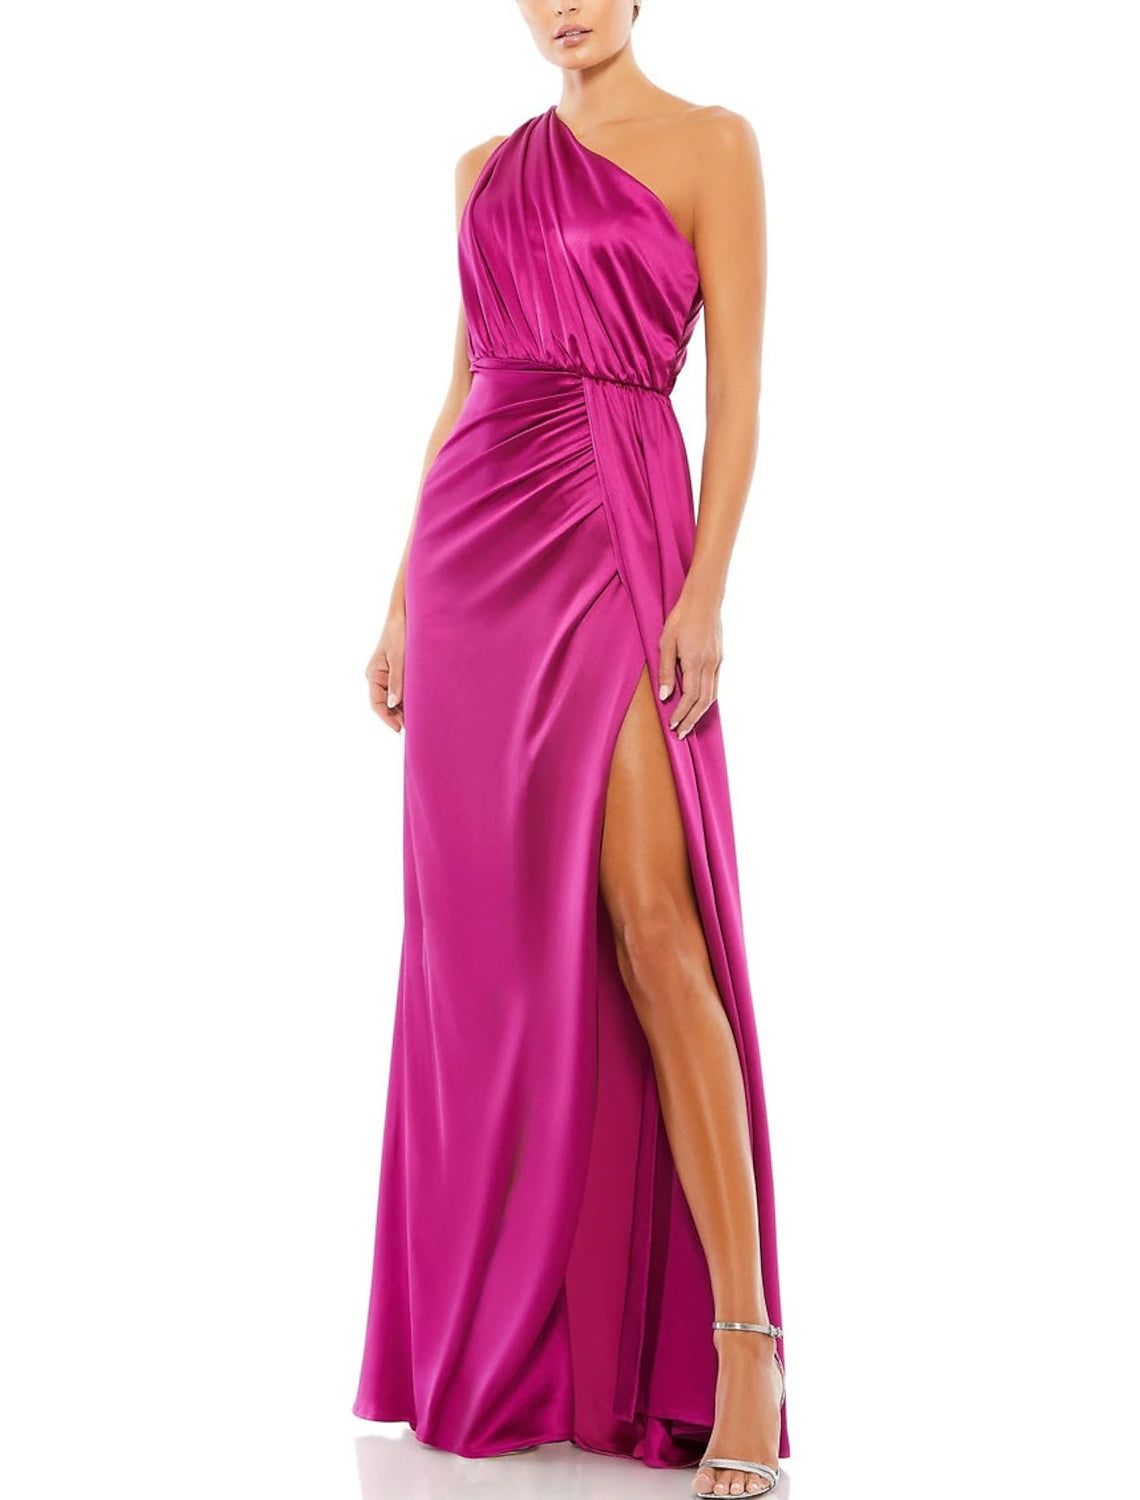 Wholesa A-Line Evening Gown Elegant Dress Formal Wedding Floor Length Sleeveless One Shoulder Charmeuse with Ruched Slit